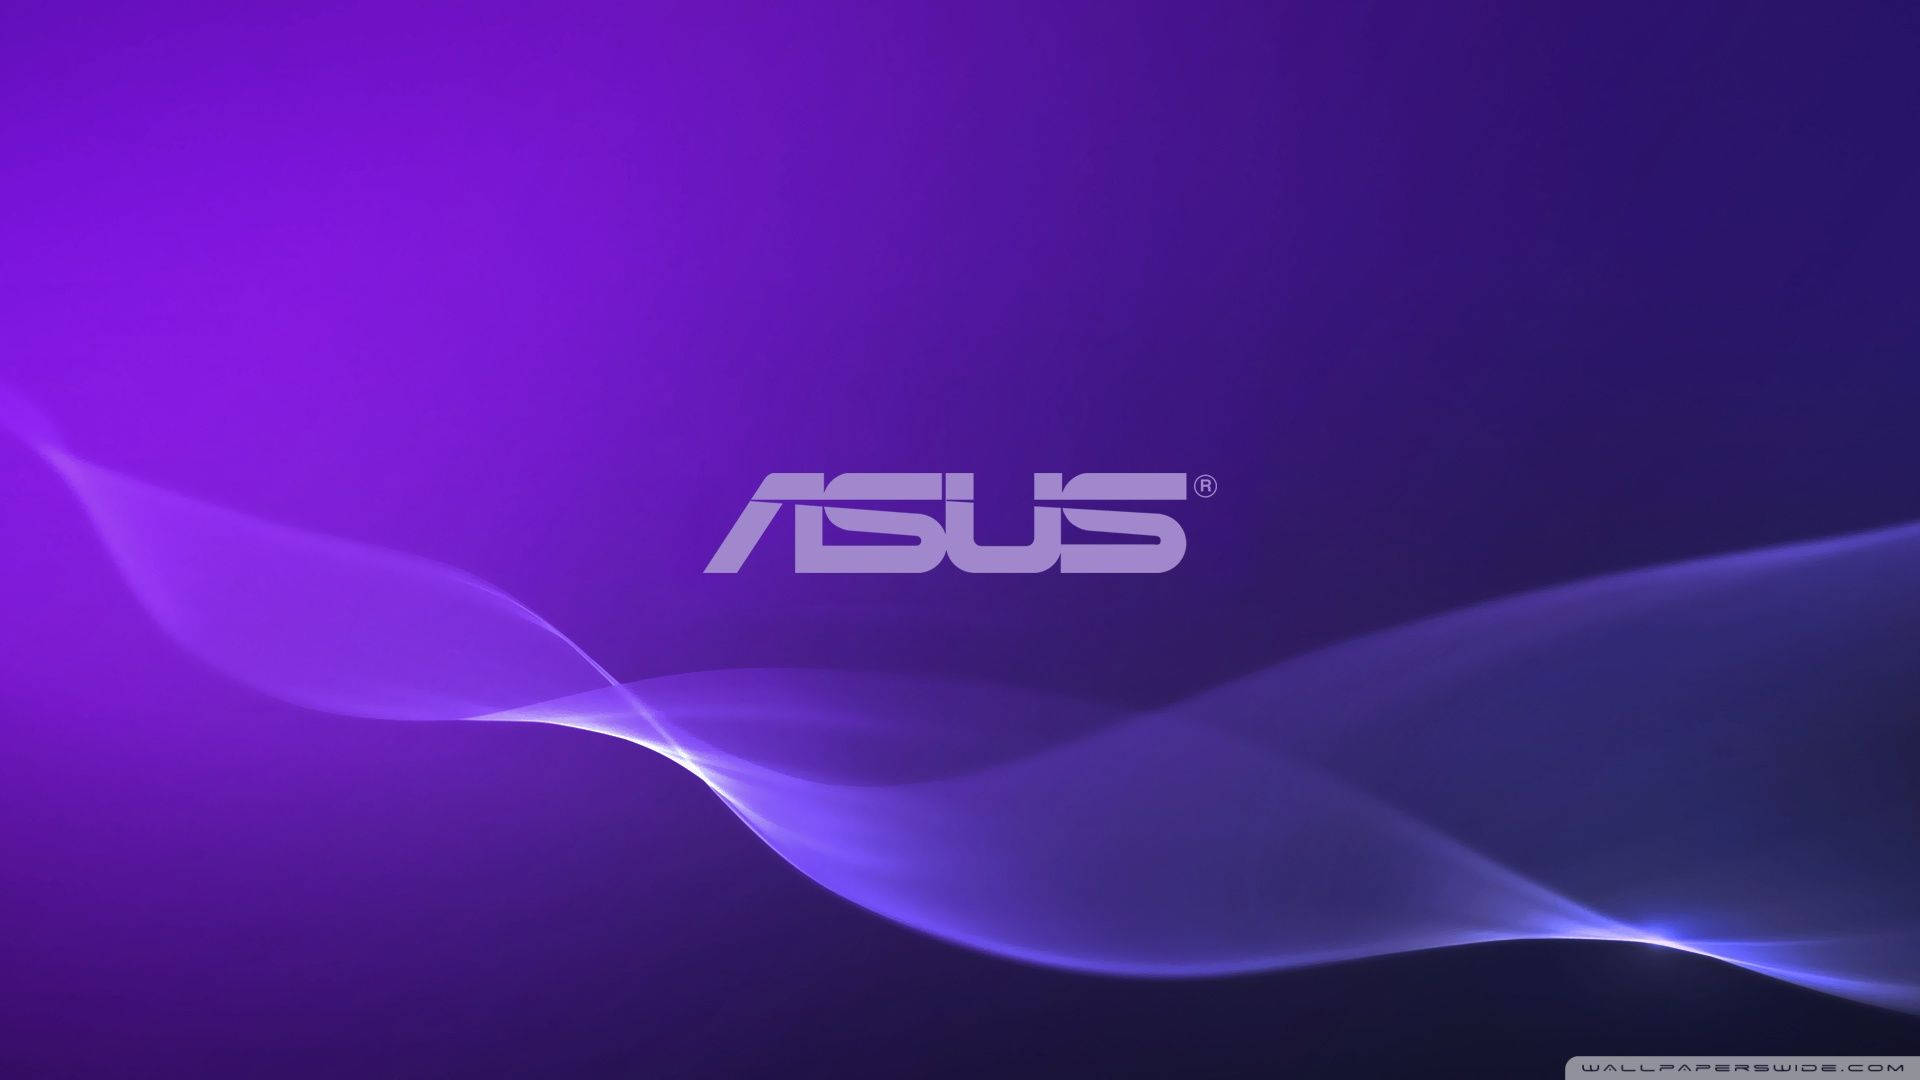 Explore the Wonders of Technology with the Asus EeeBook Wallpaper